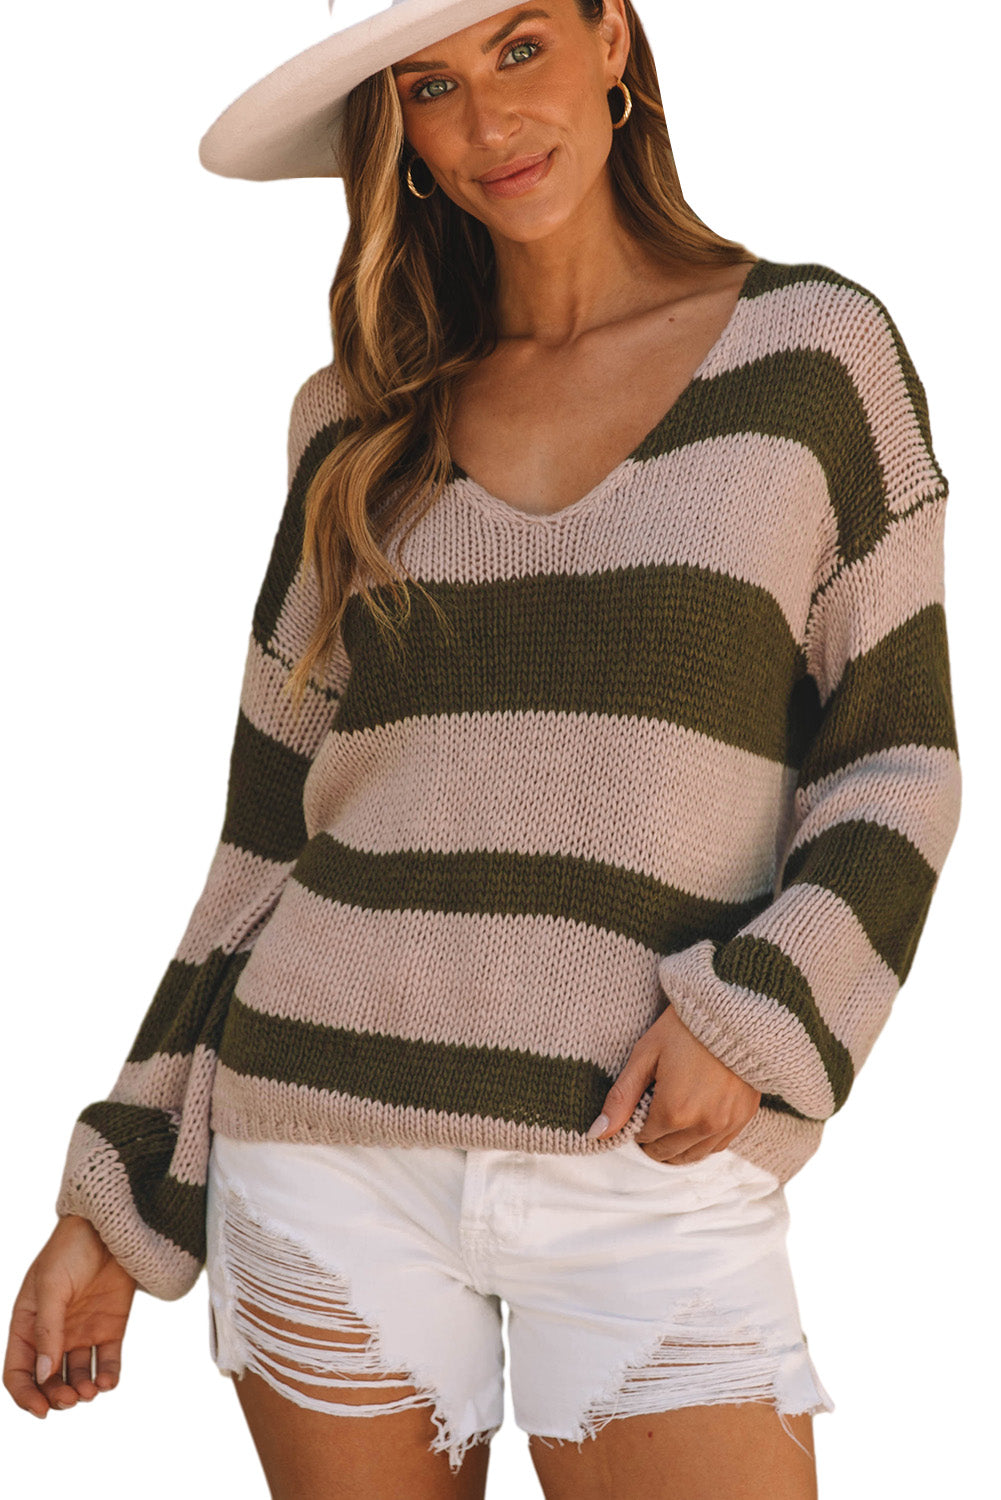 Green Striped Colorblock Knit V Neck Loose Fit Sweater